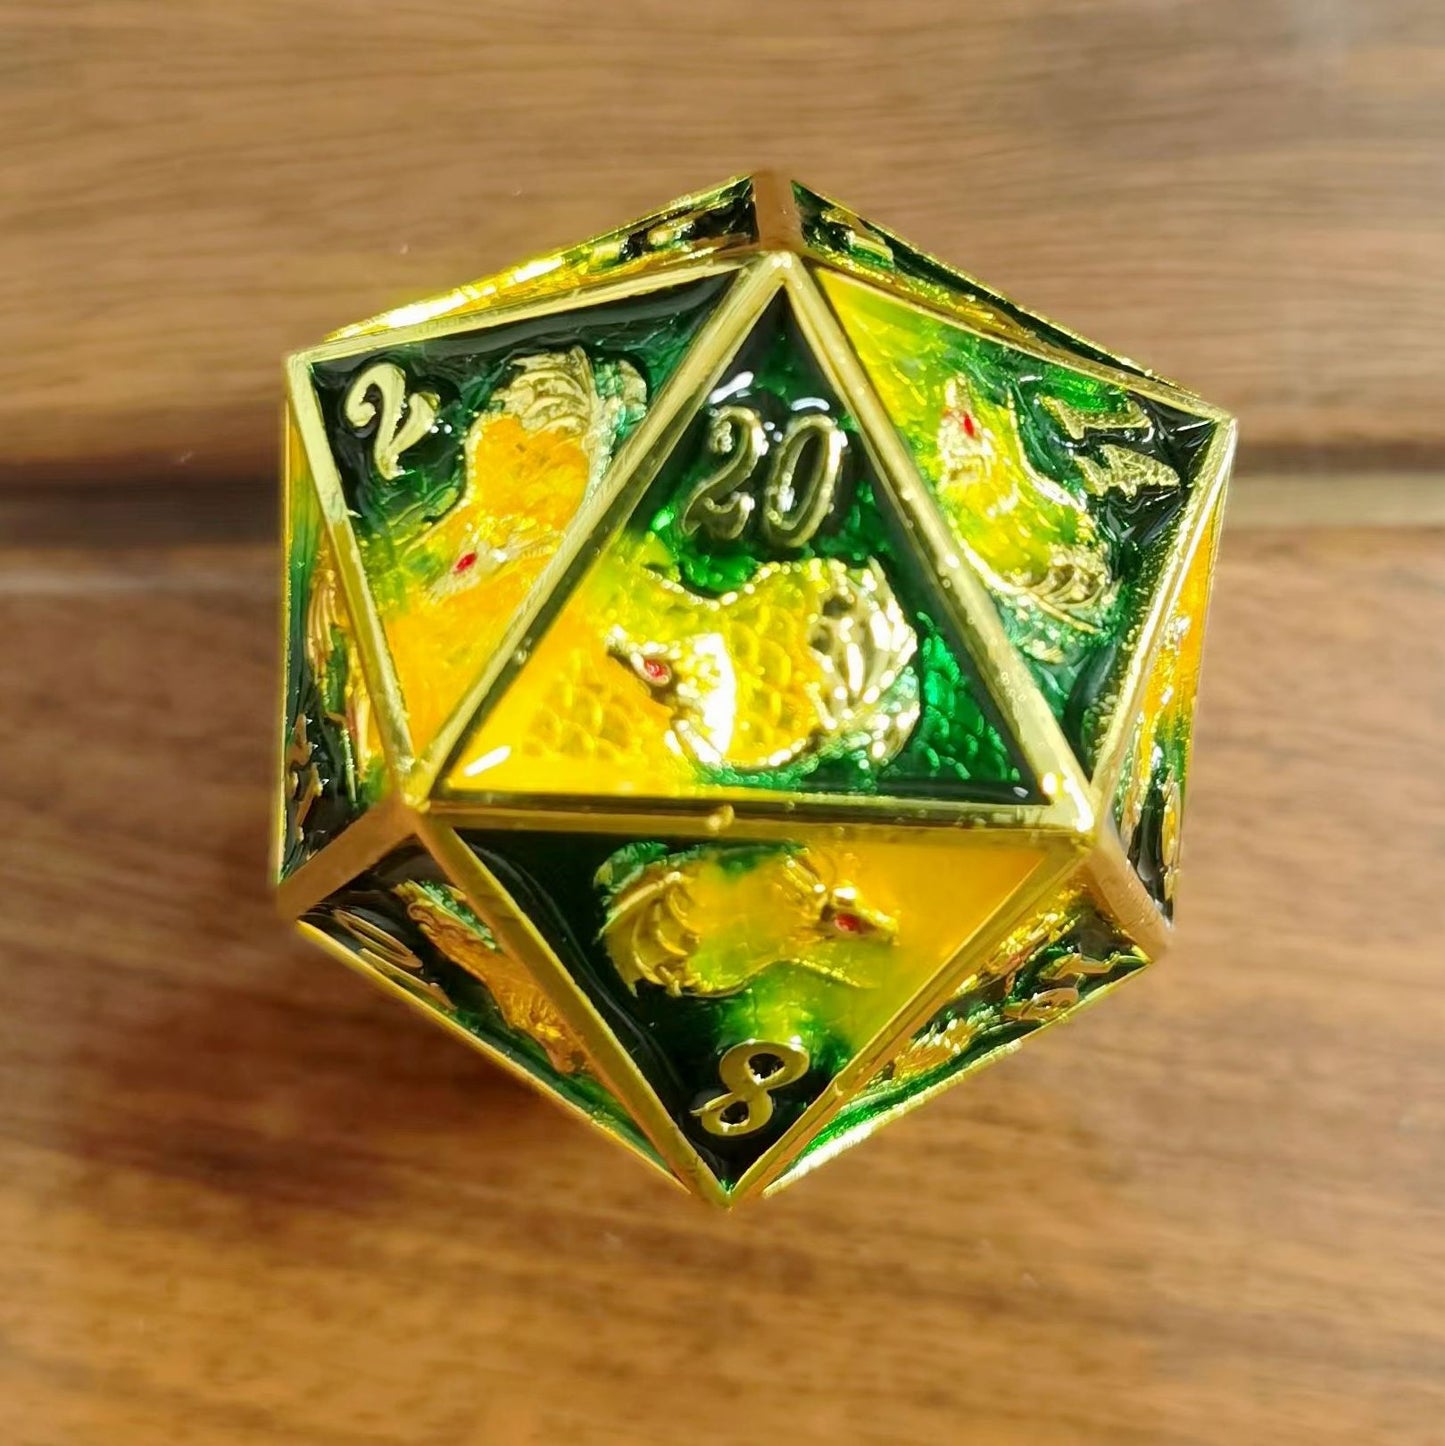 45MM Solid Metal Dragon Chonk D20-Gold w/Yellow& Green